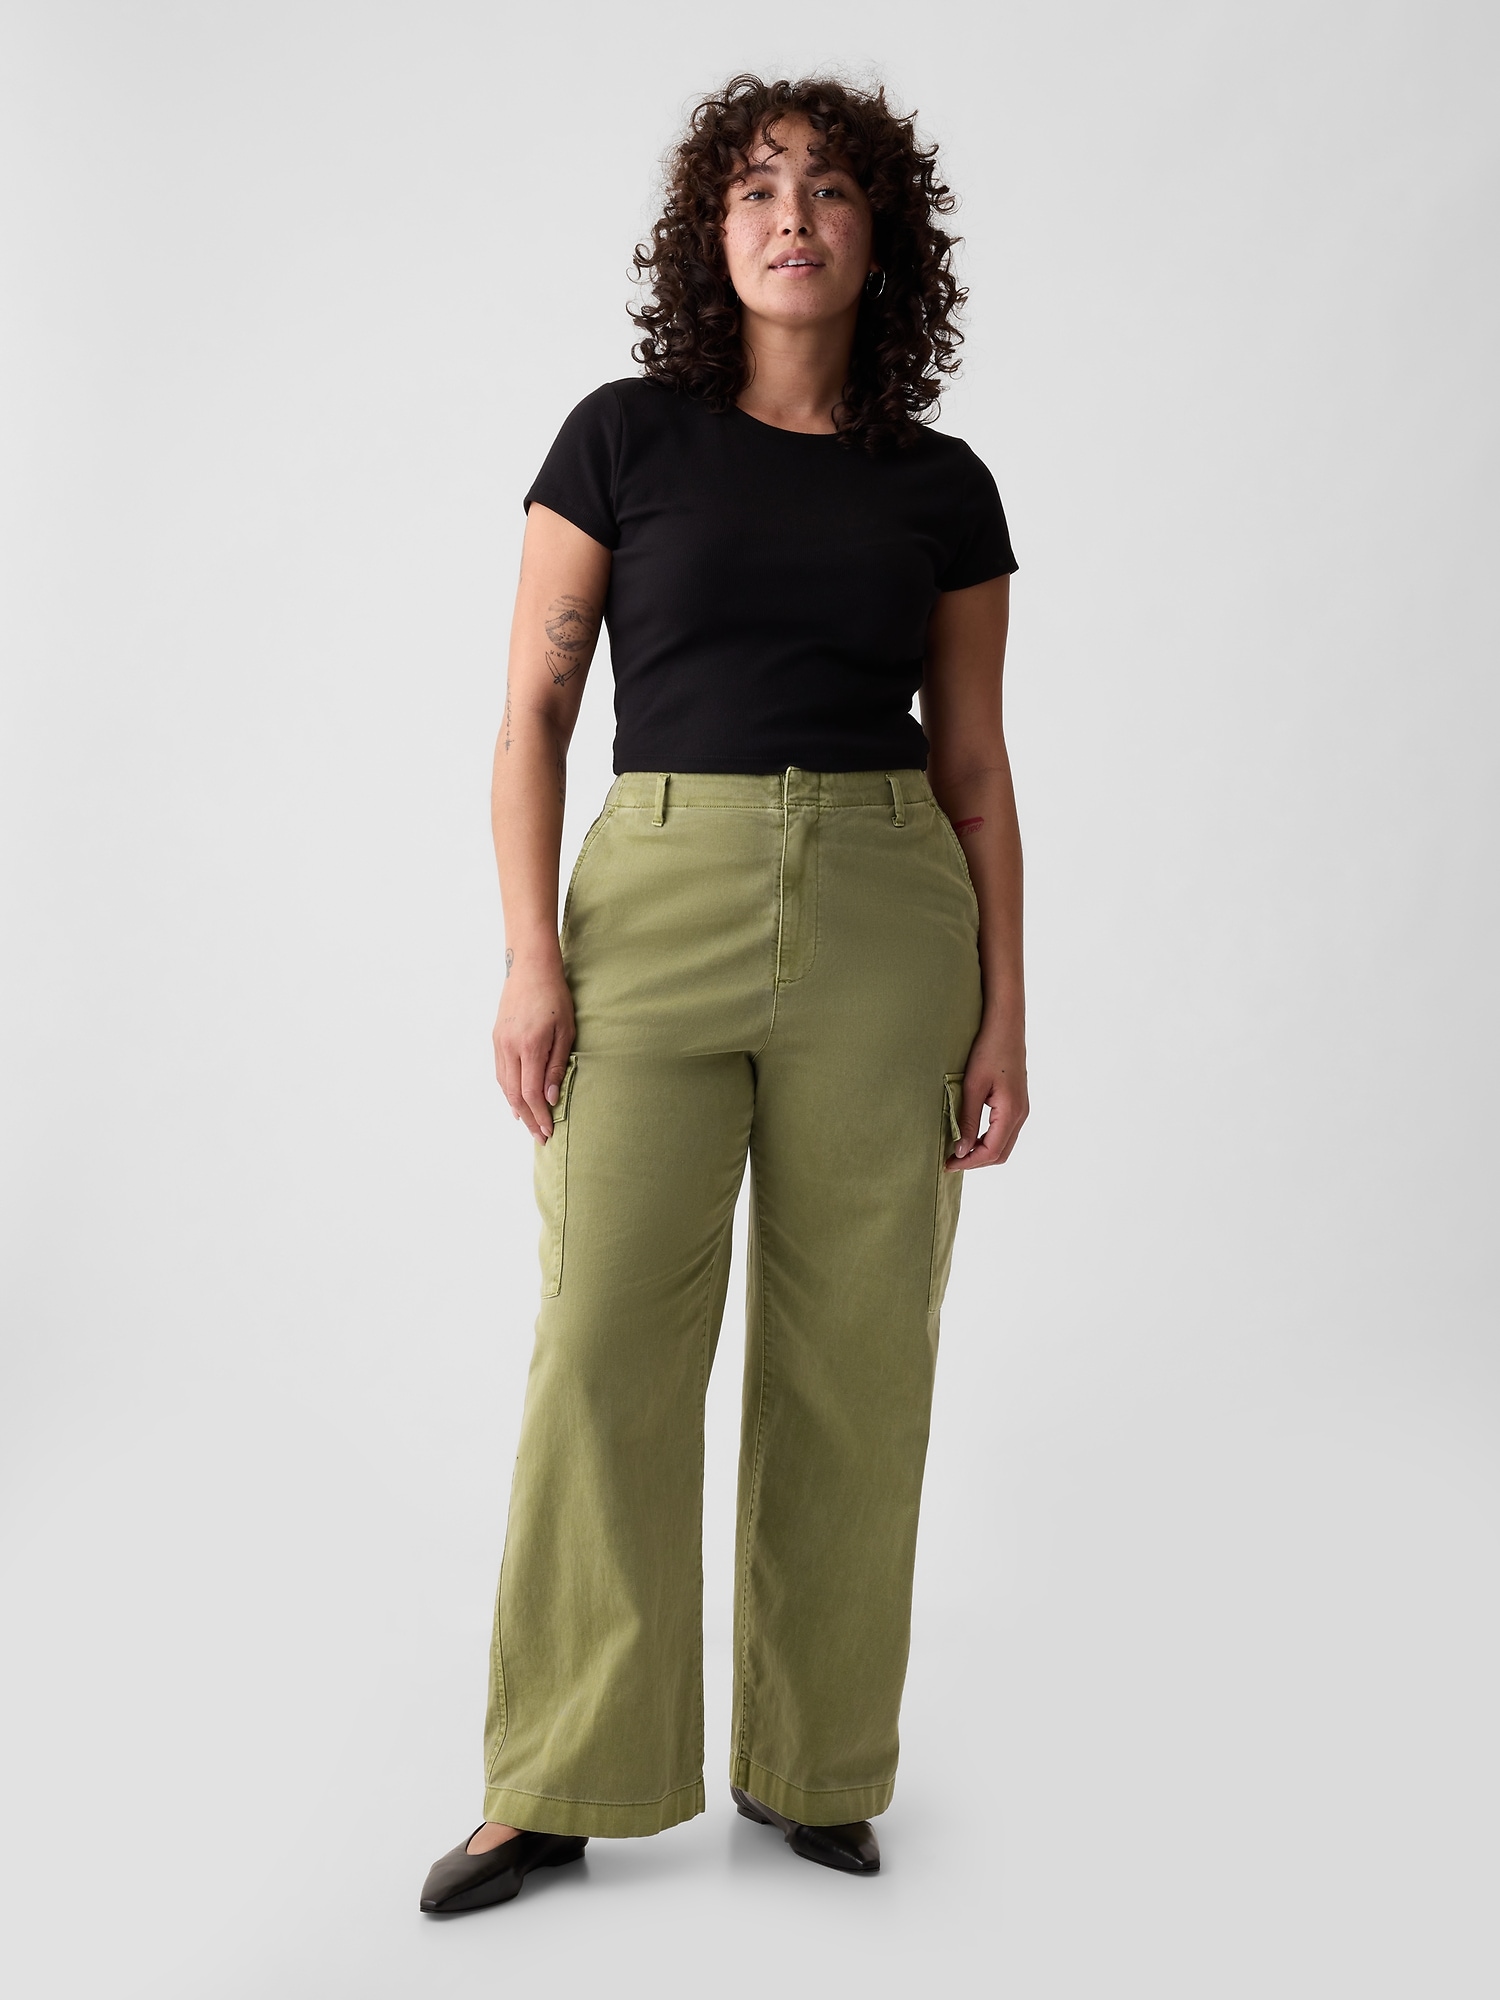 Olive Green Pants Outfit - J.Crew | Rhyme & Reason